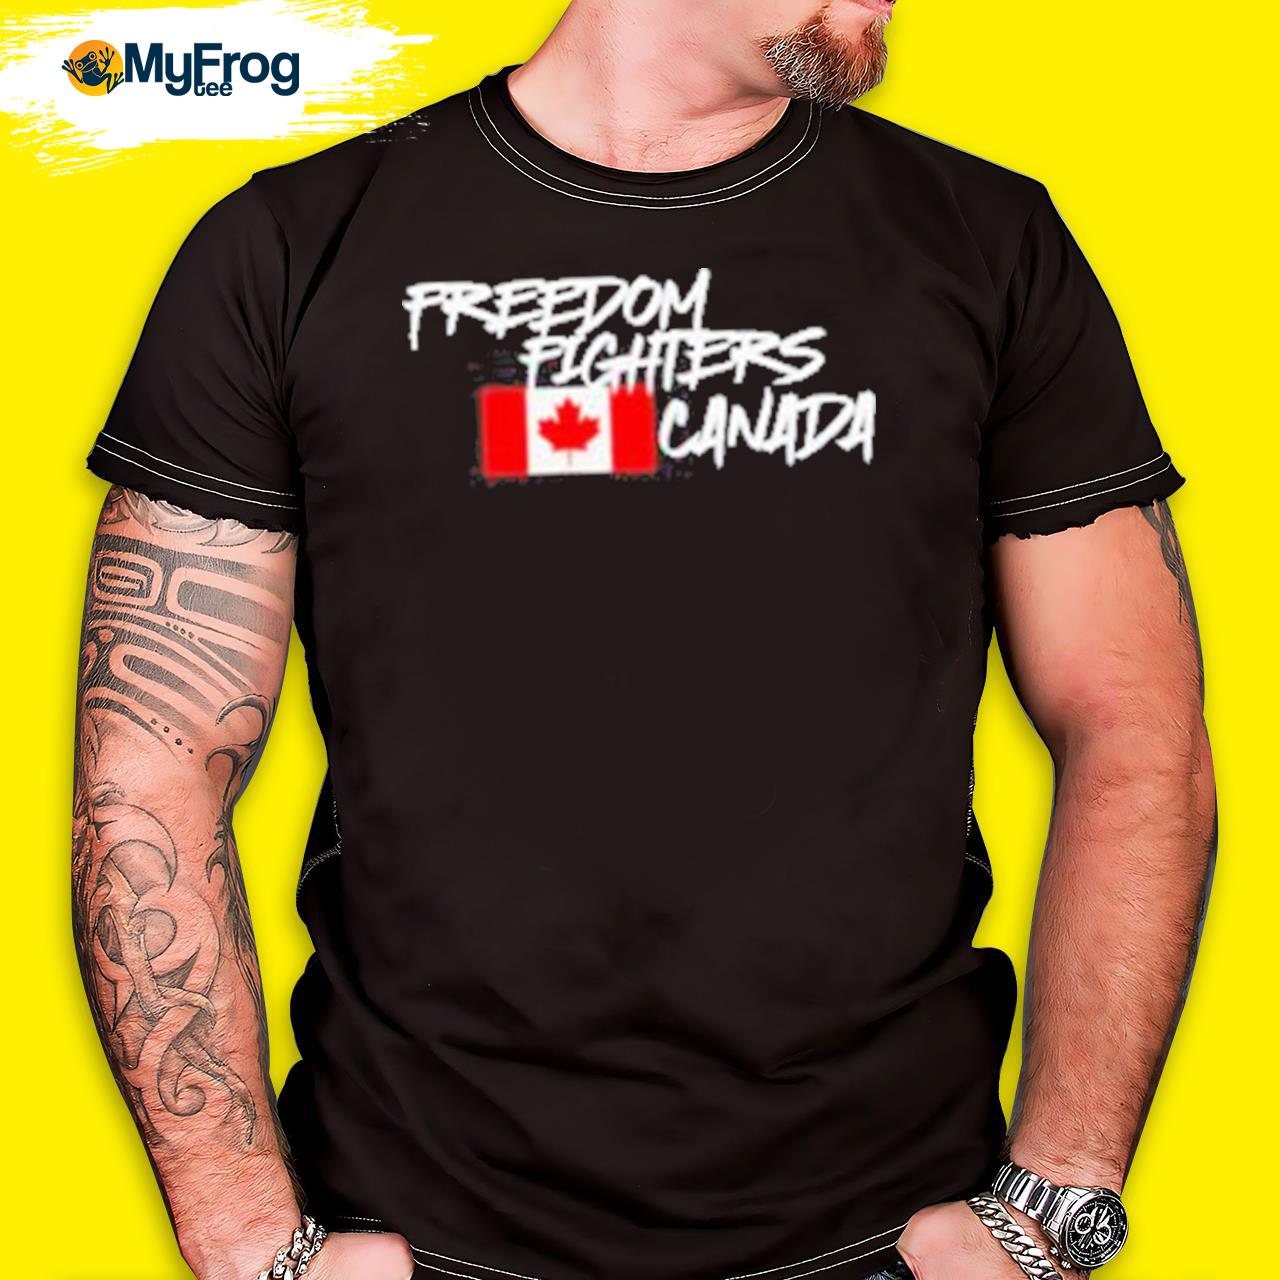 Freedom Fighters Canada shirt